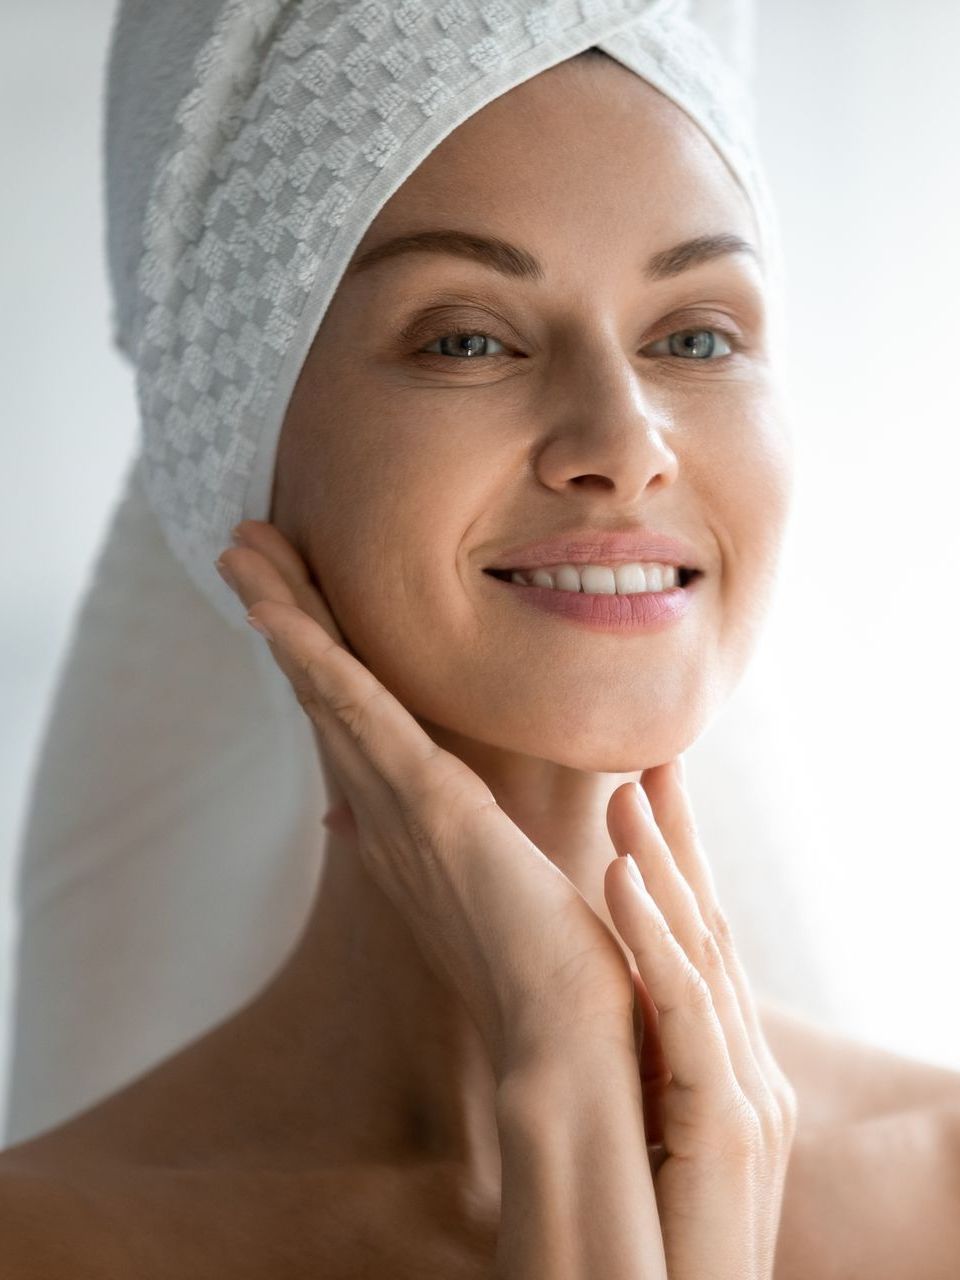 A woman with a towel wrapped around her head is smiling and touching her face.